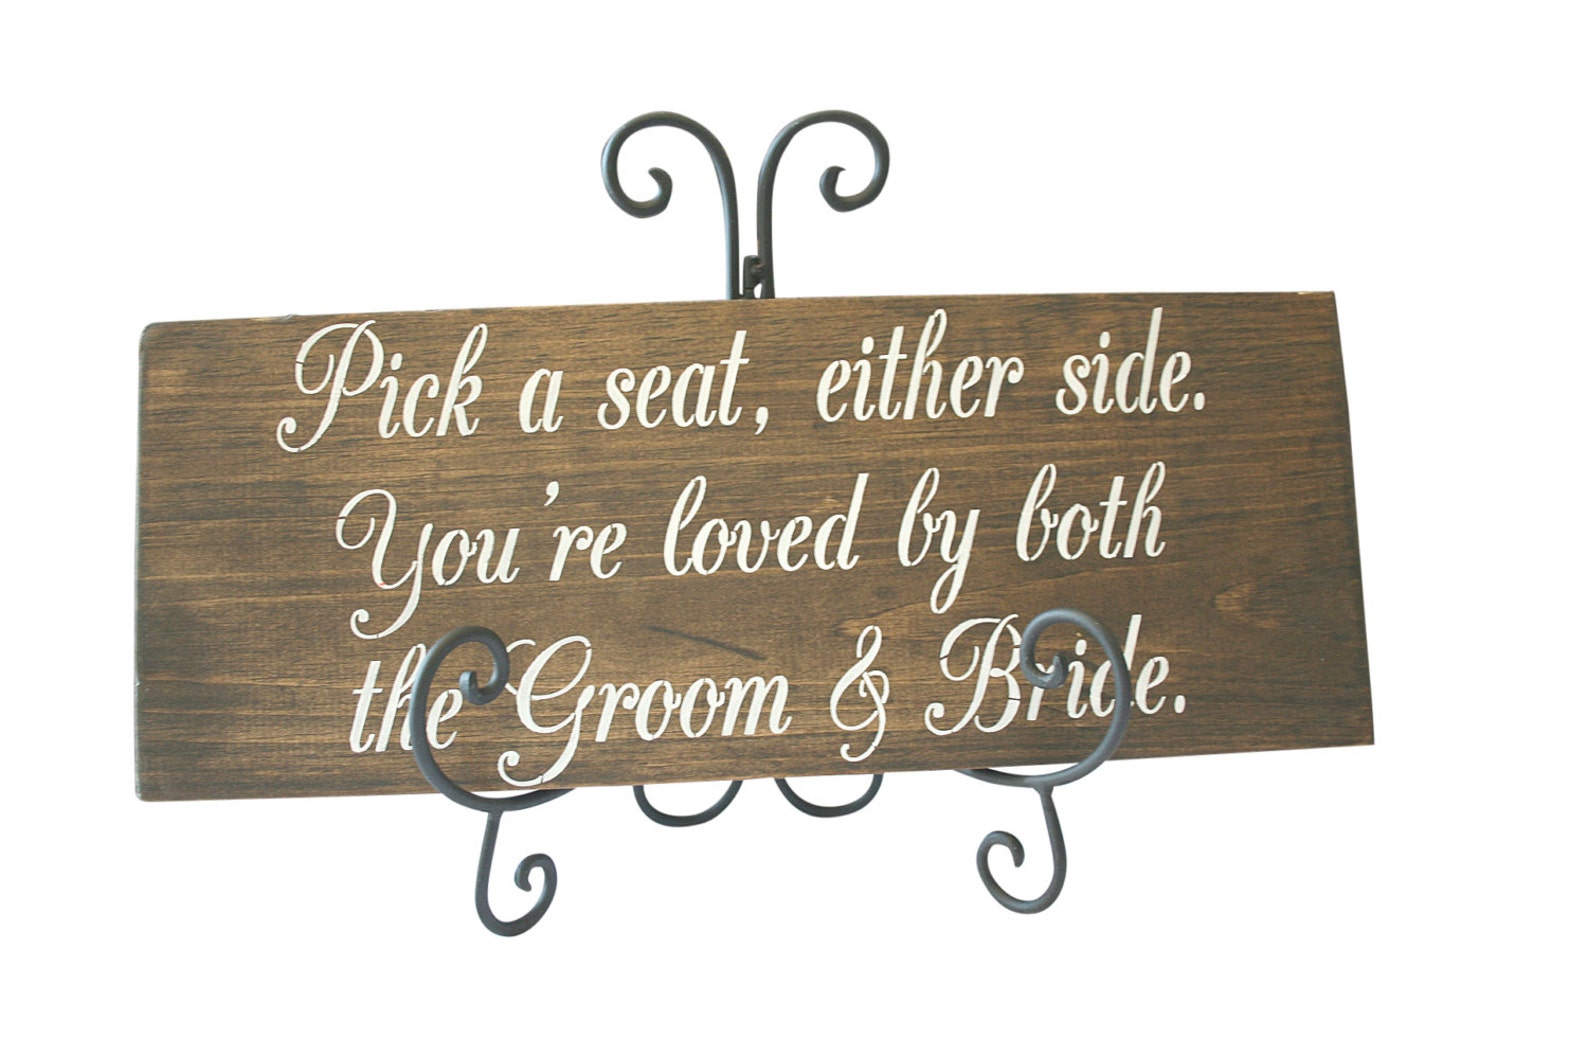 pick-a-seat-either-side-you-re-loved-by-the-groom-bride-etsy